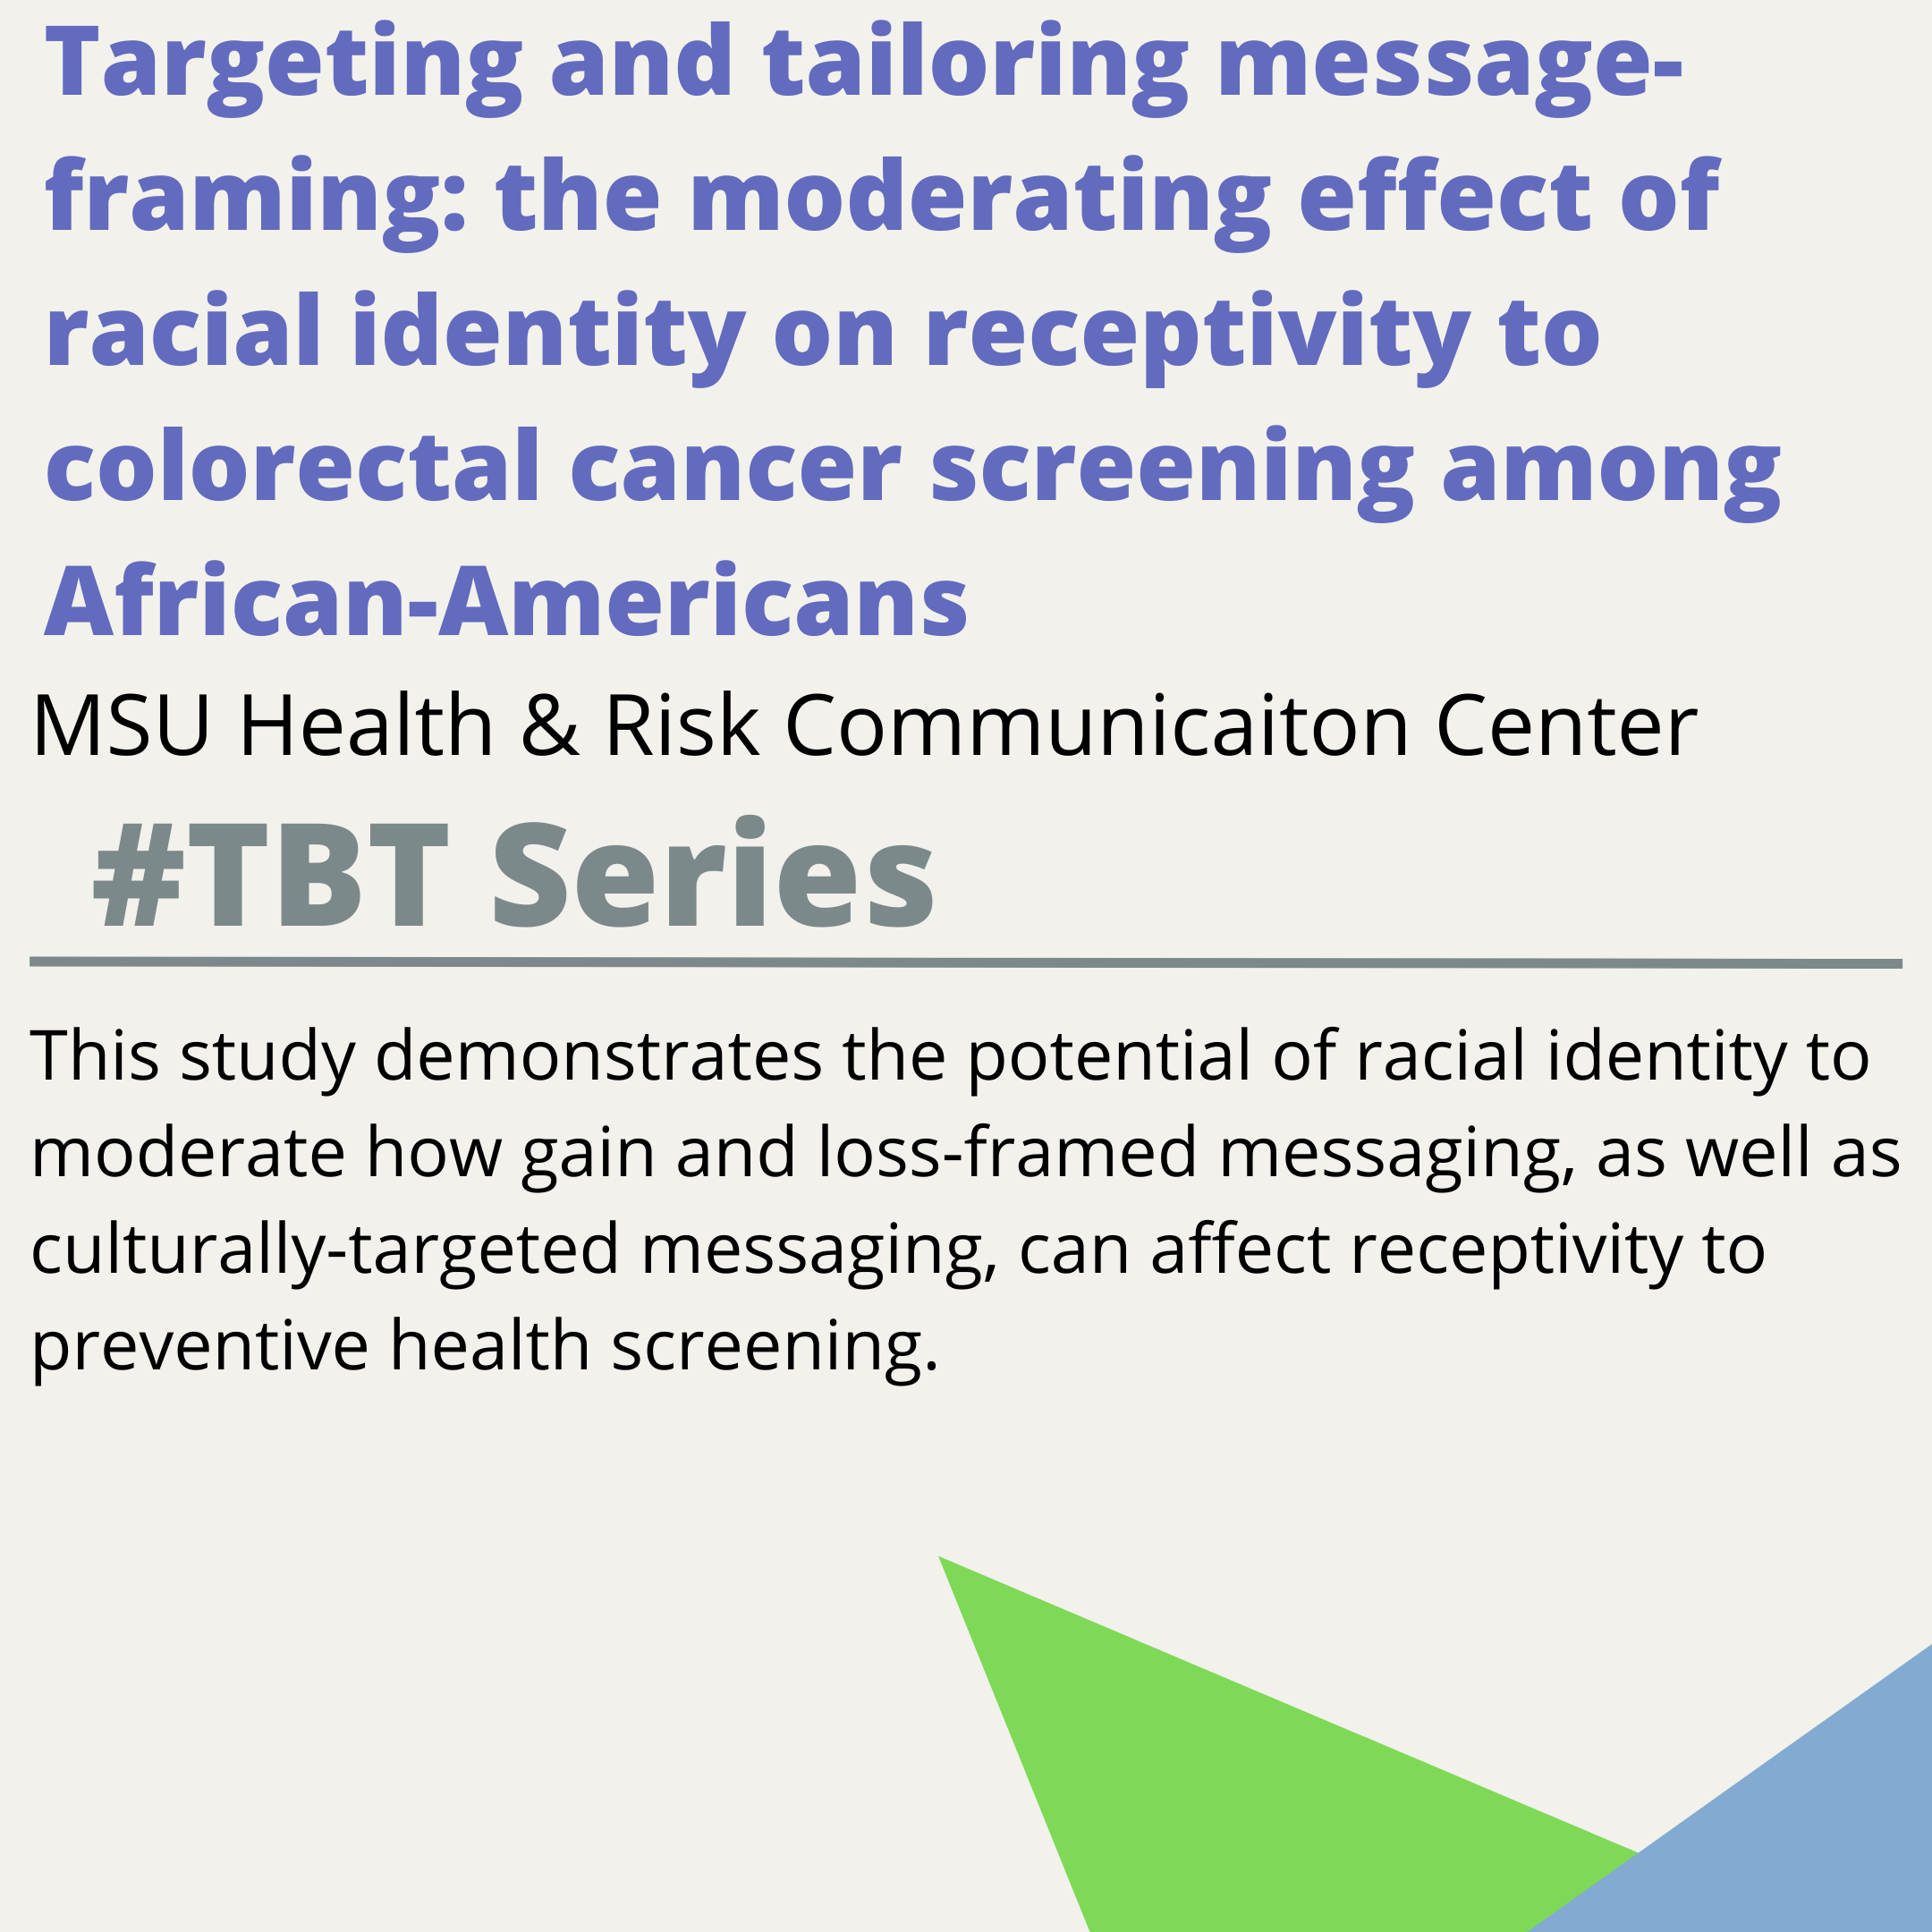 Targeting and tailoring message-framing: the moderating effect of racial identity on receptivity to colorectal cancer screening among African-Americans